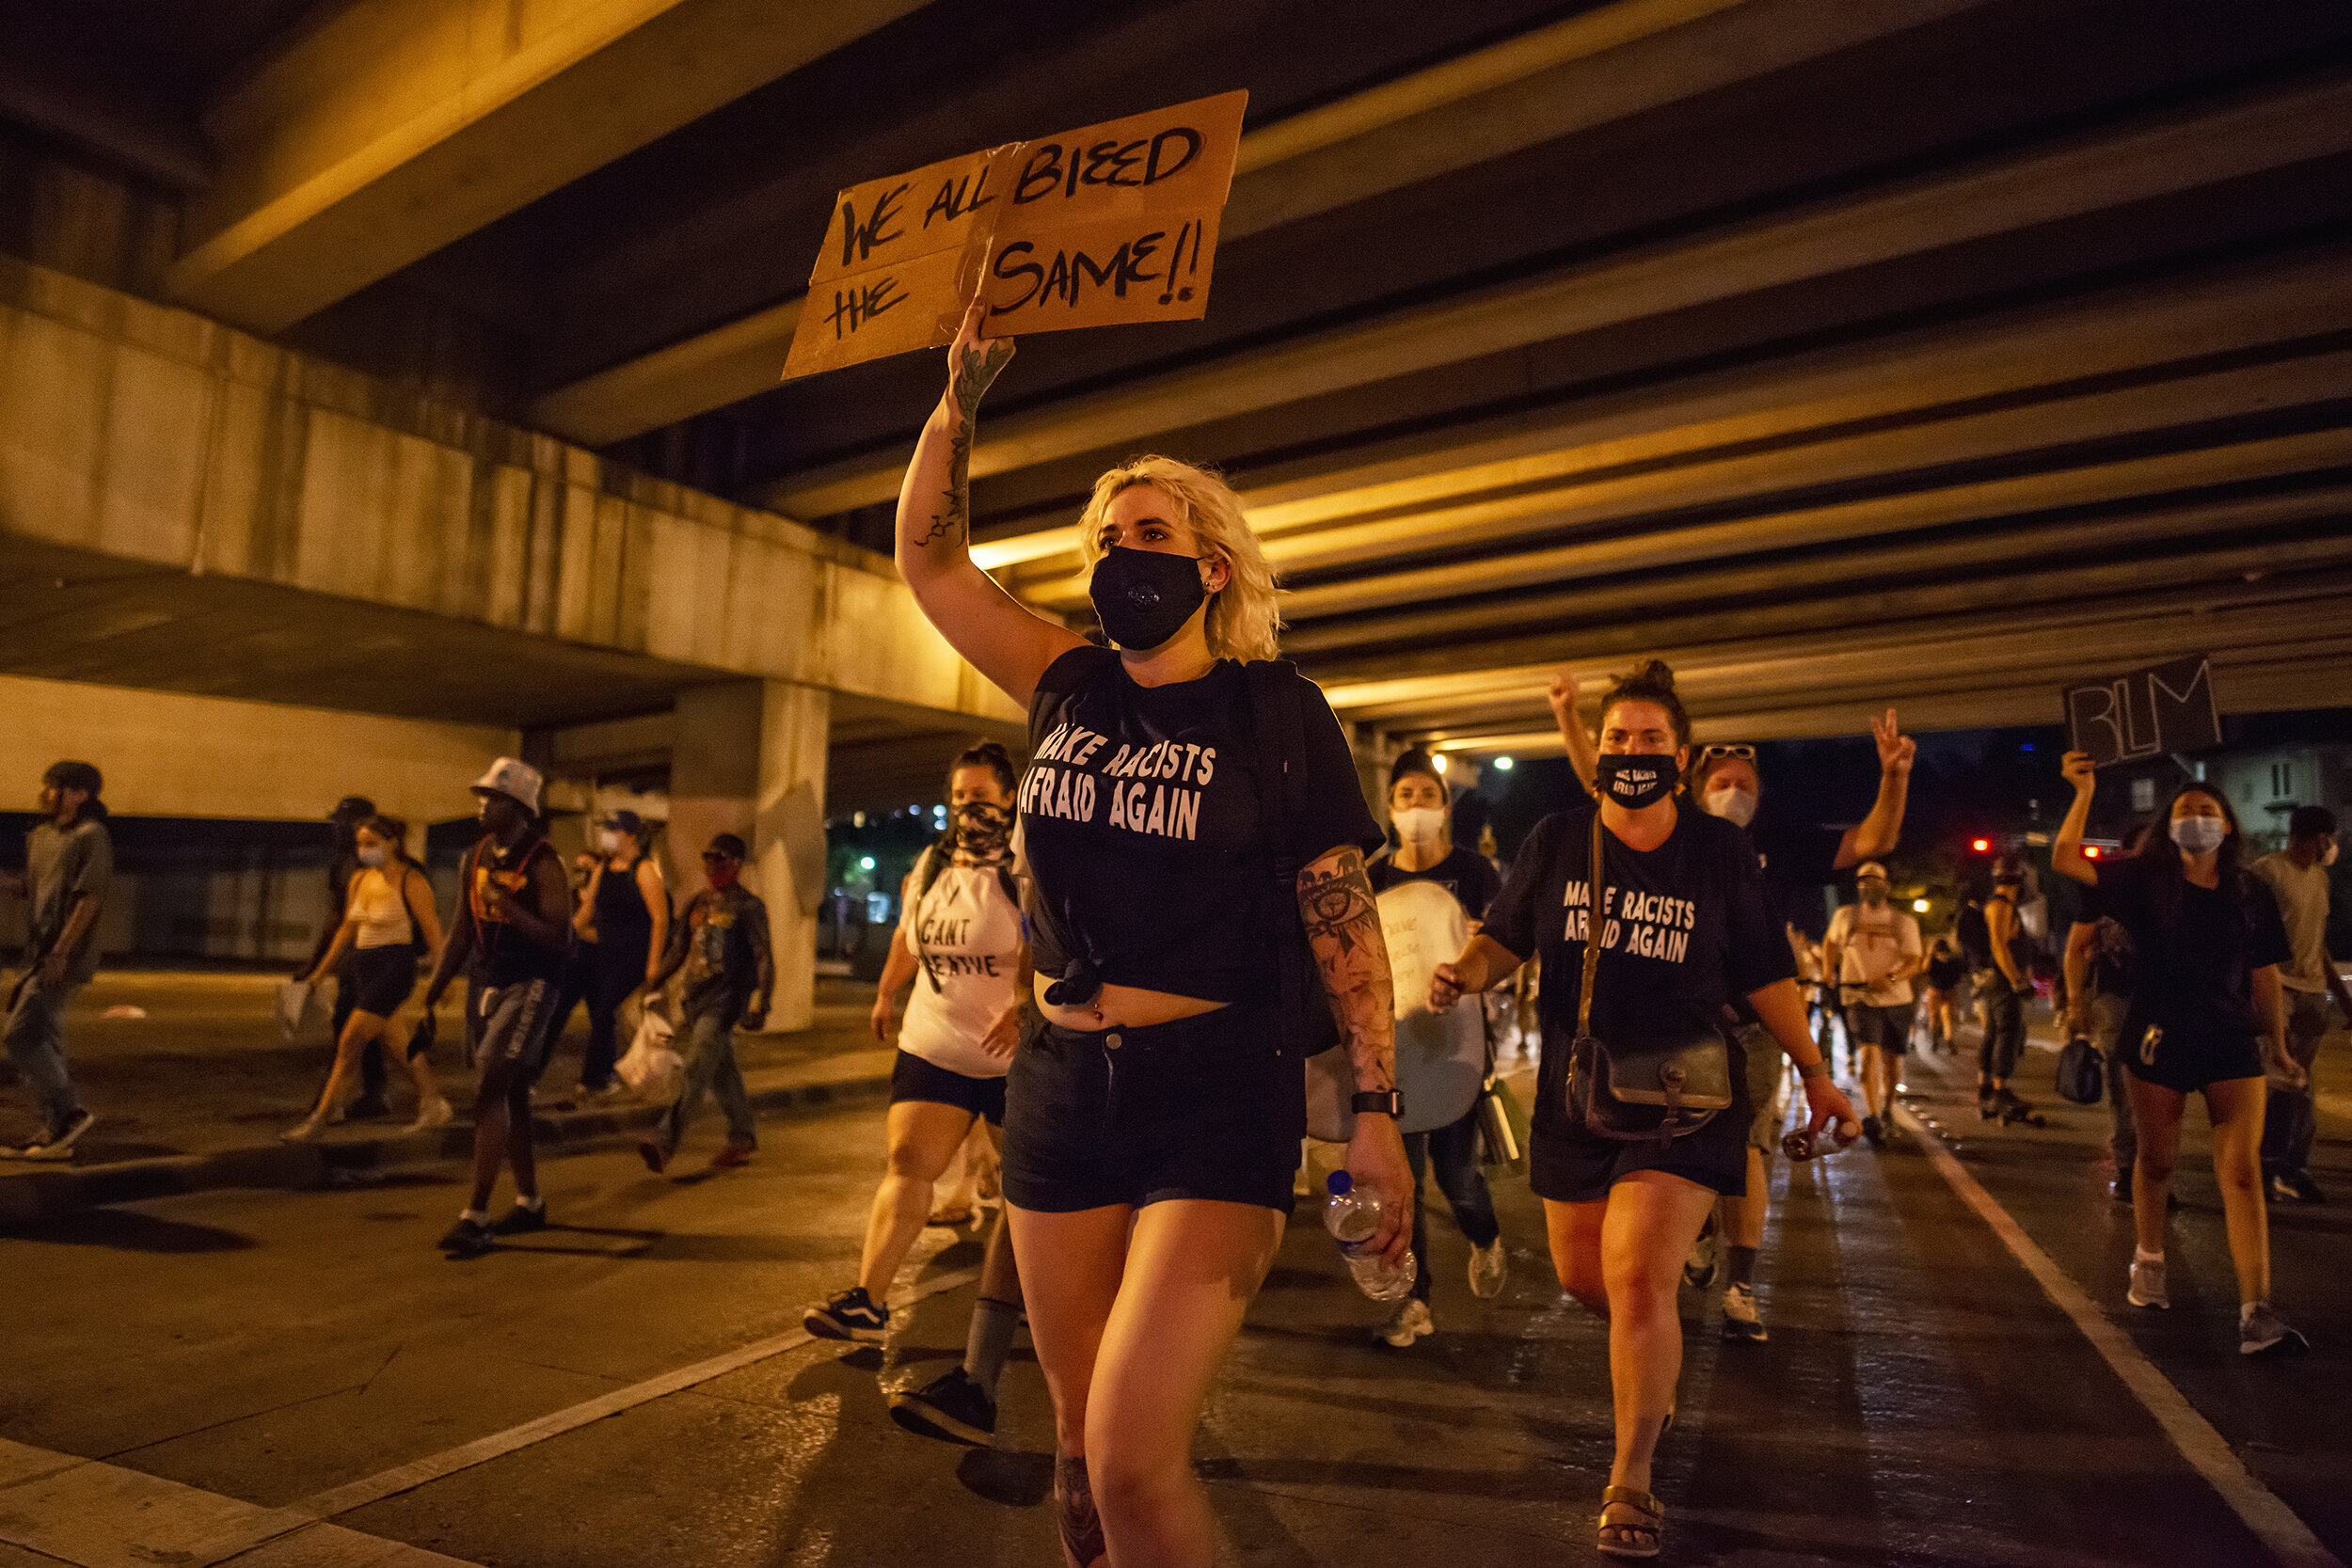  Protesters on Routh Street pass under Woodall Rodgers Freeway in Dallas, TX on June 7, 2020.  With echoes abounding, protest chants often intensified beneath bridges. 